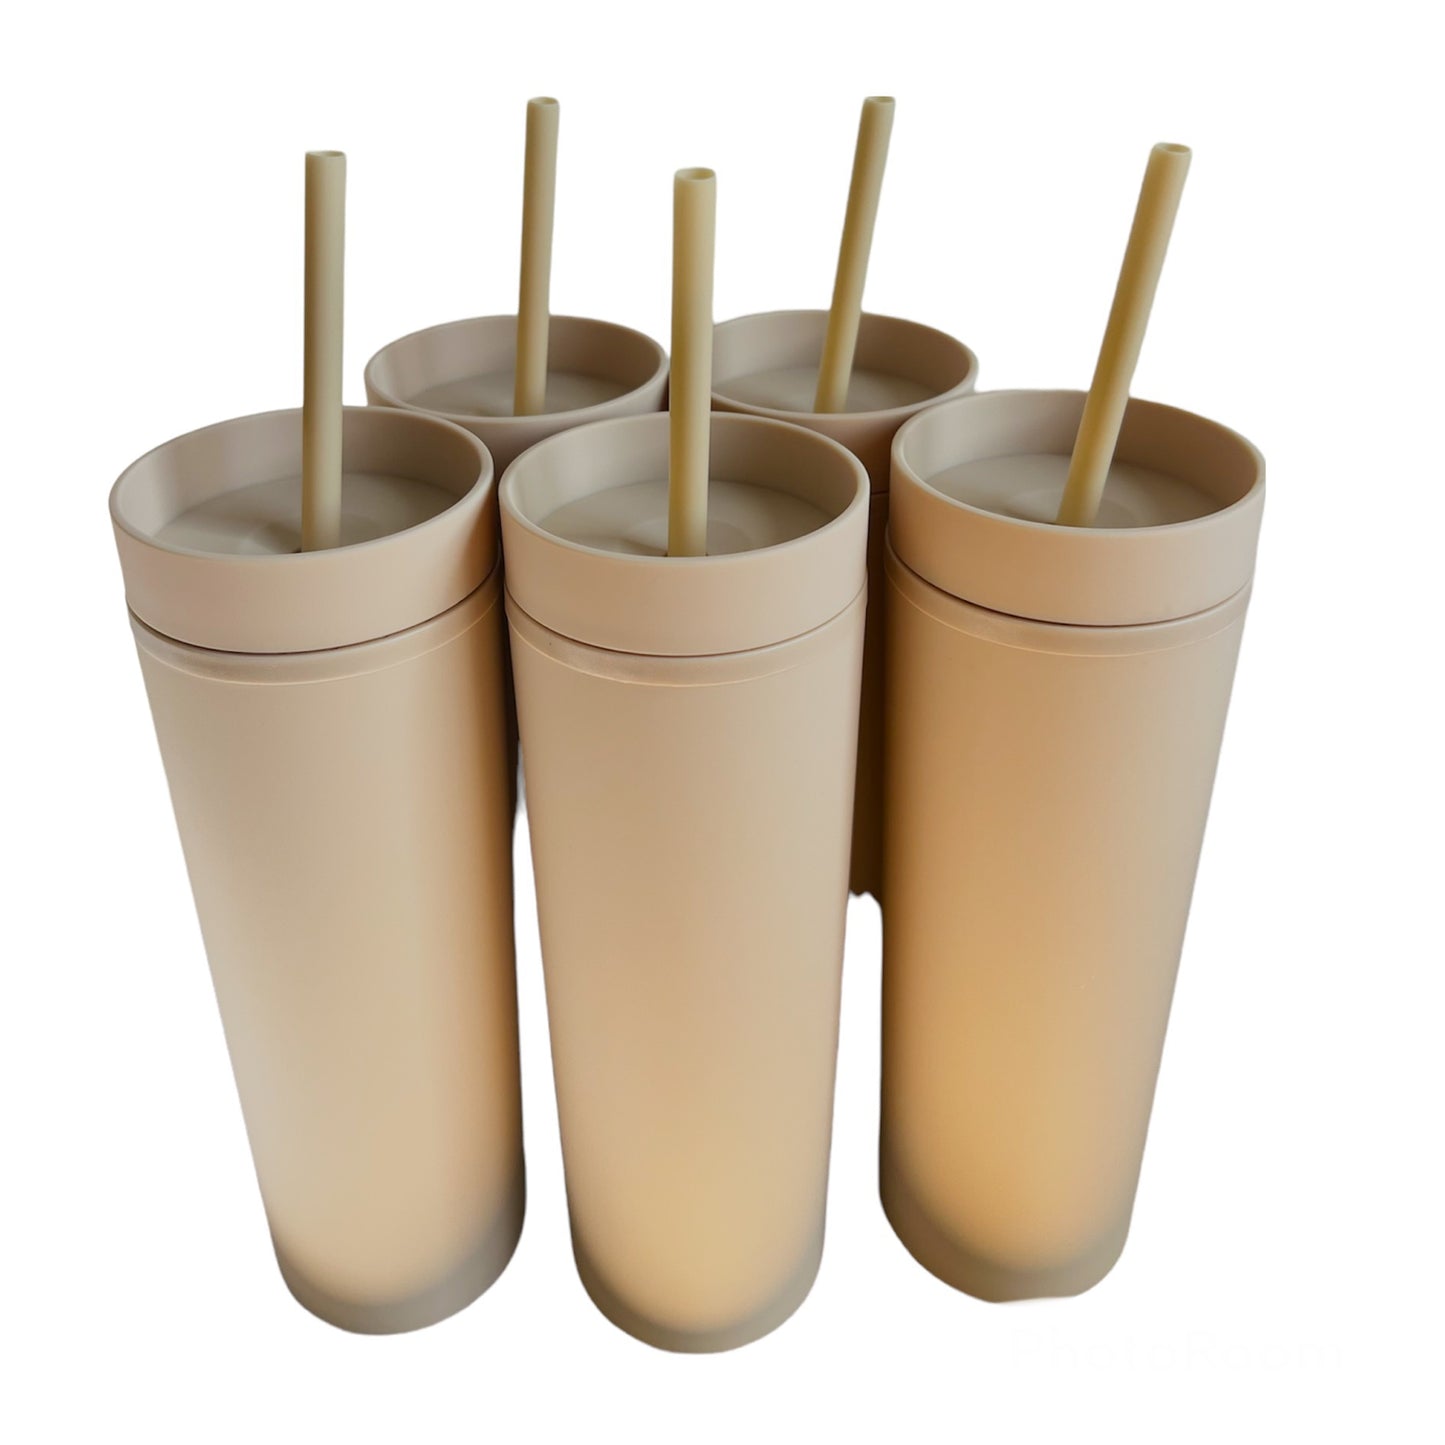 16oz Double wall Skinny Tumbler with lid and straw. Matte Finish.